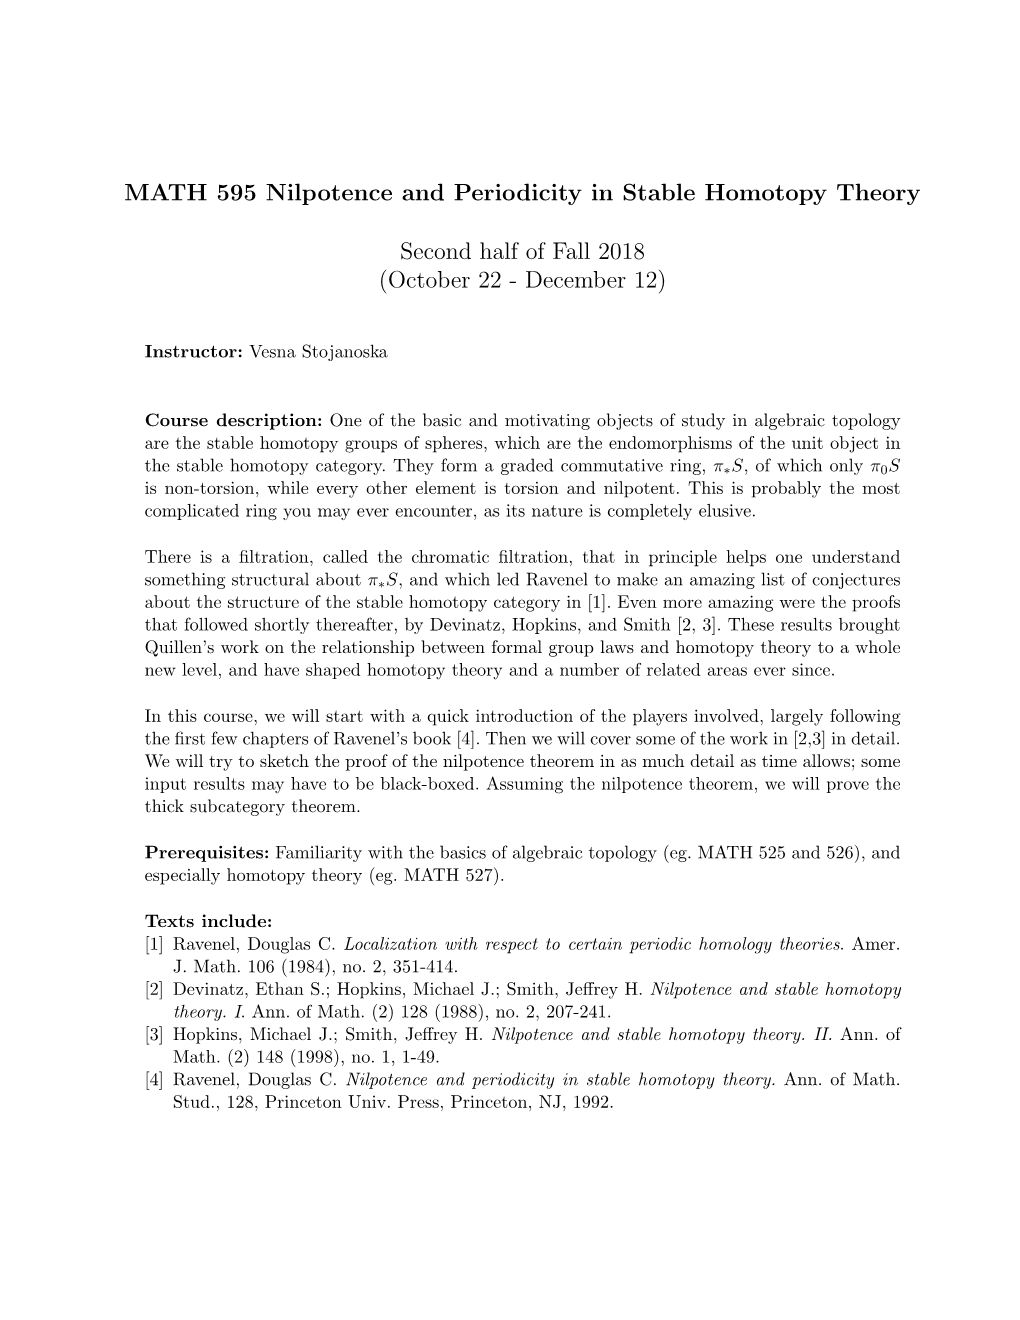 MATH 595 Nilpotence and Periodicity in Stable Homotopy Theory